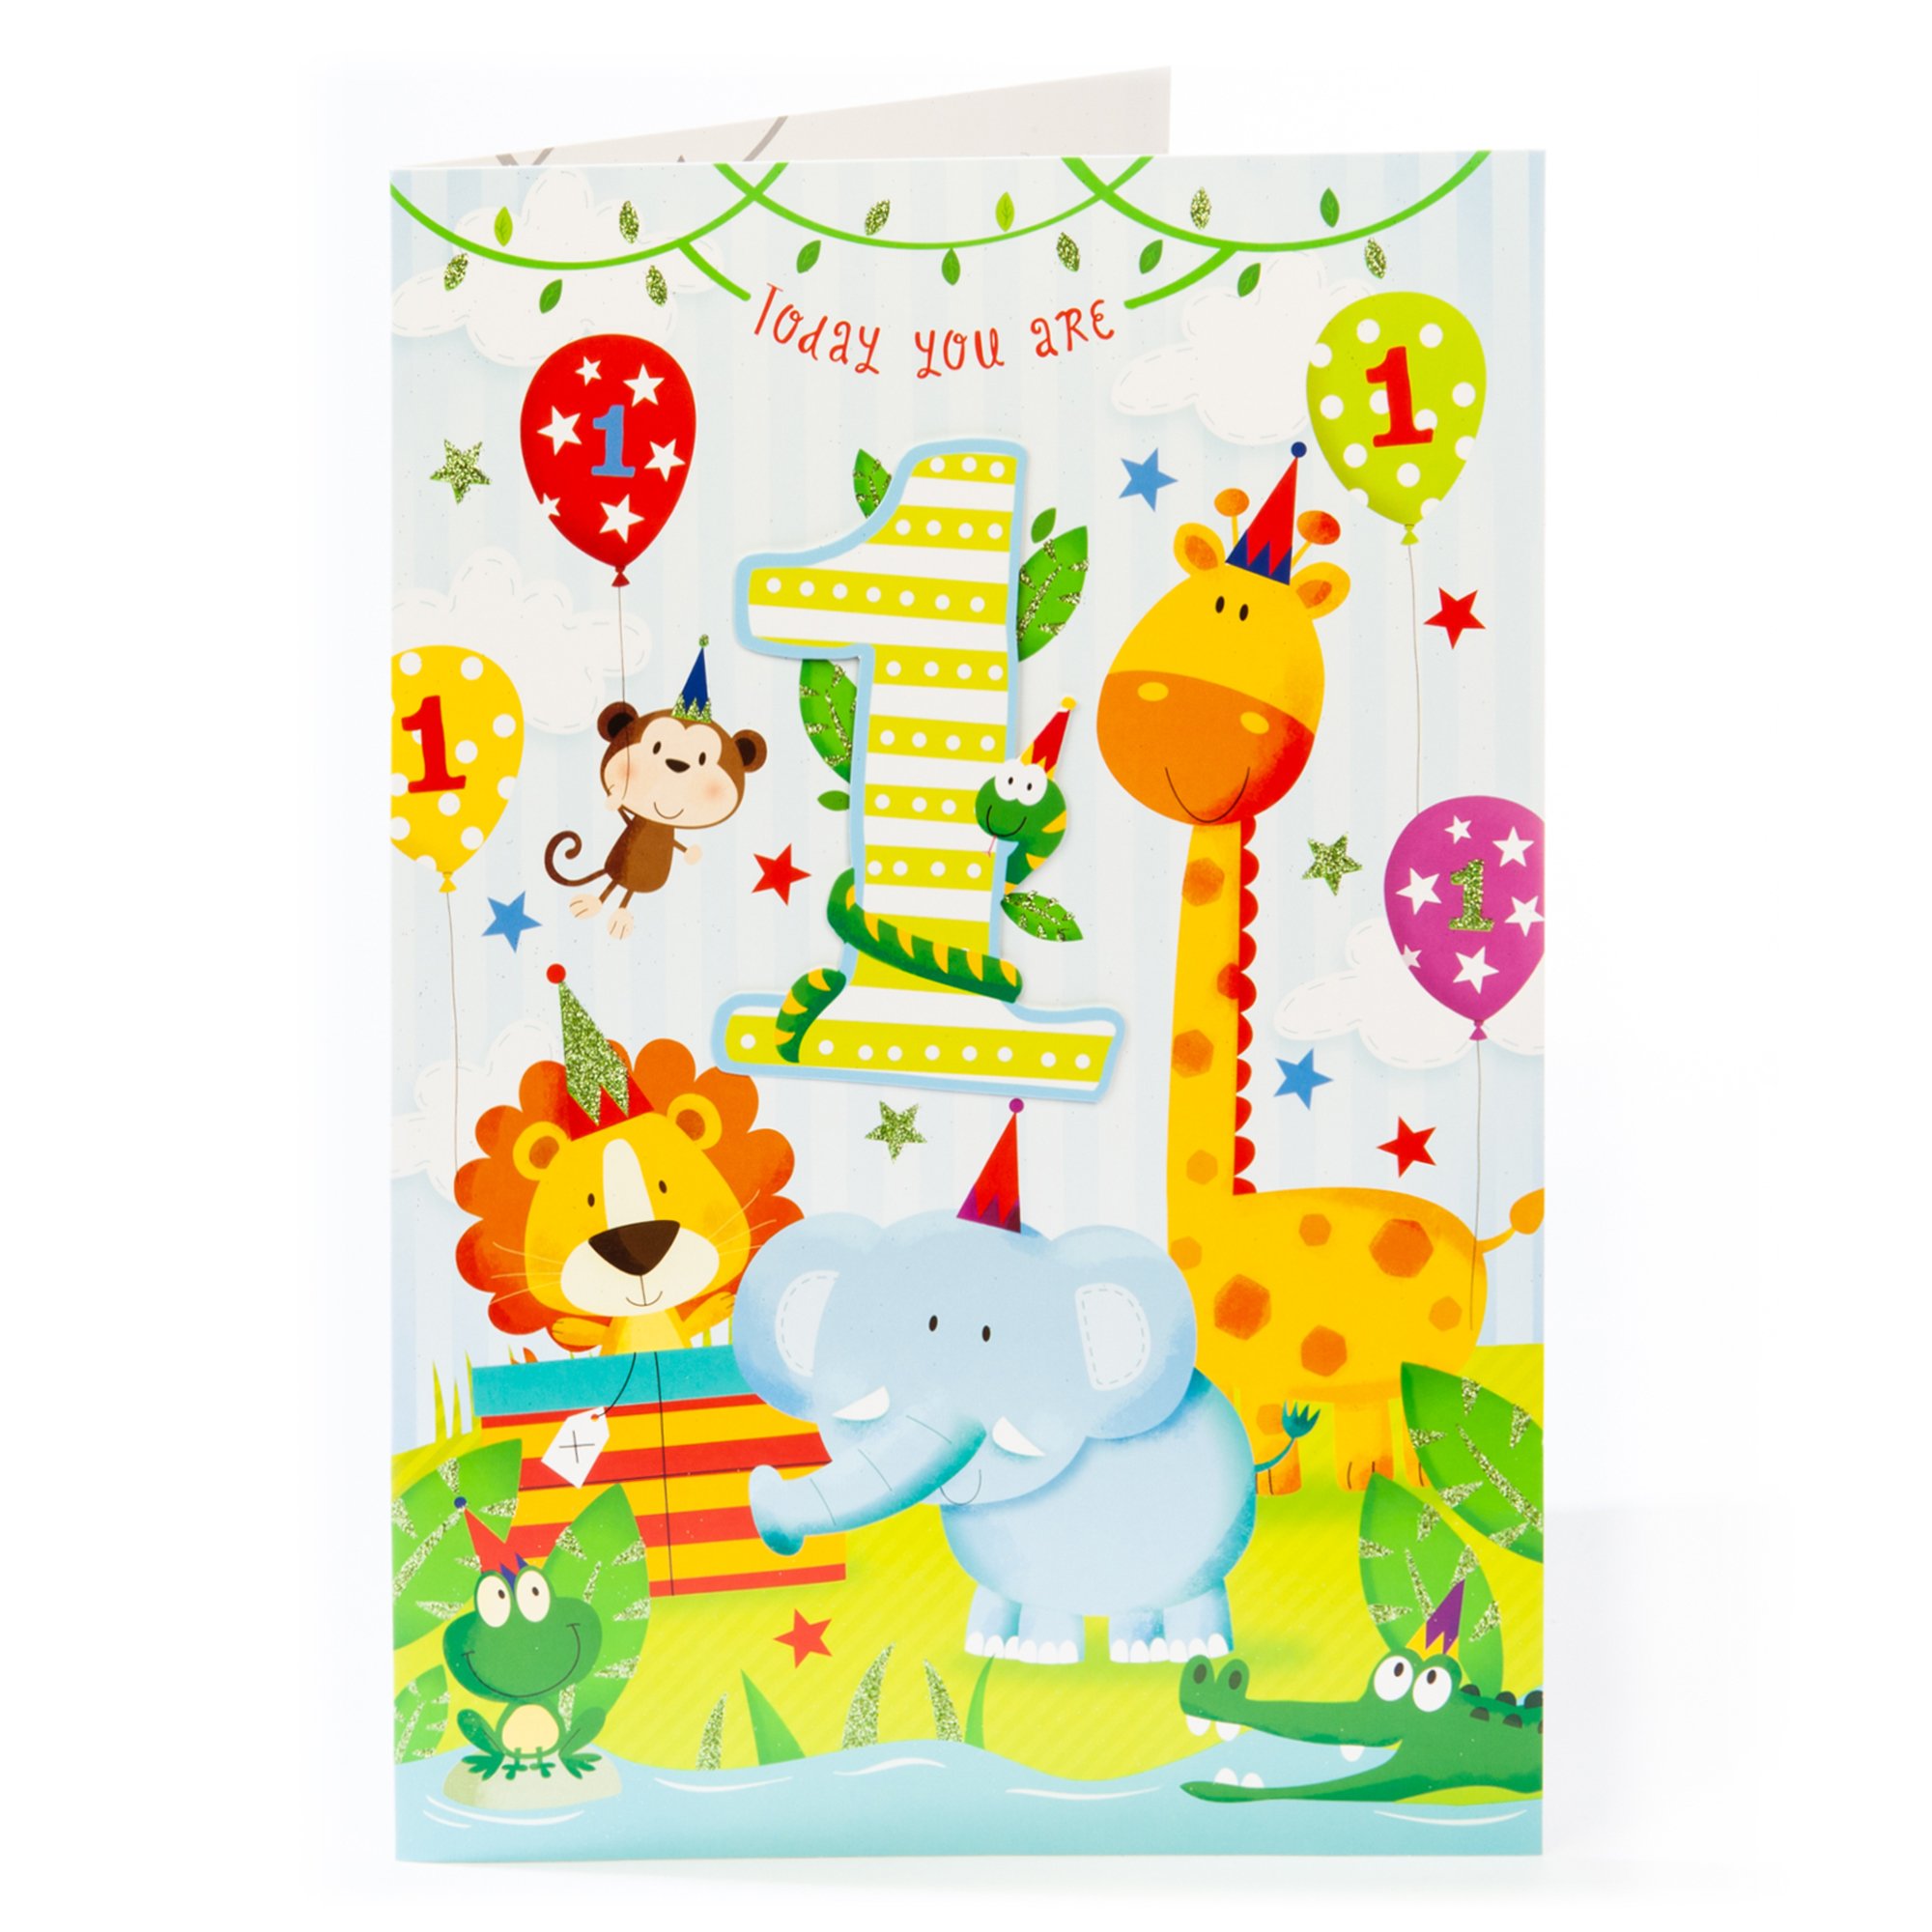 Buy Giant 1st Birthday Card - Jungle Animals for GBP 0.99 | Card Factory UK